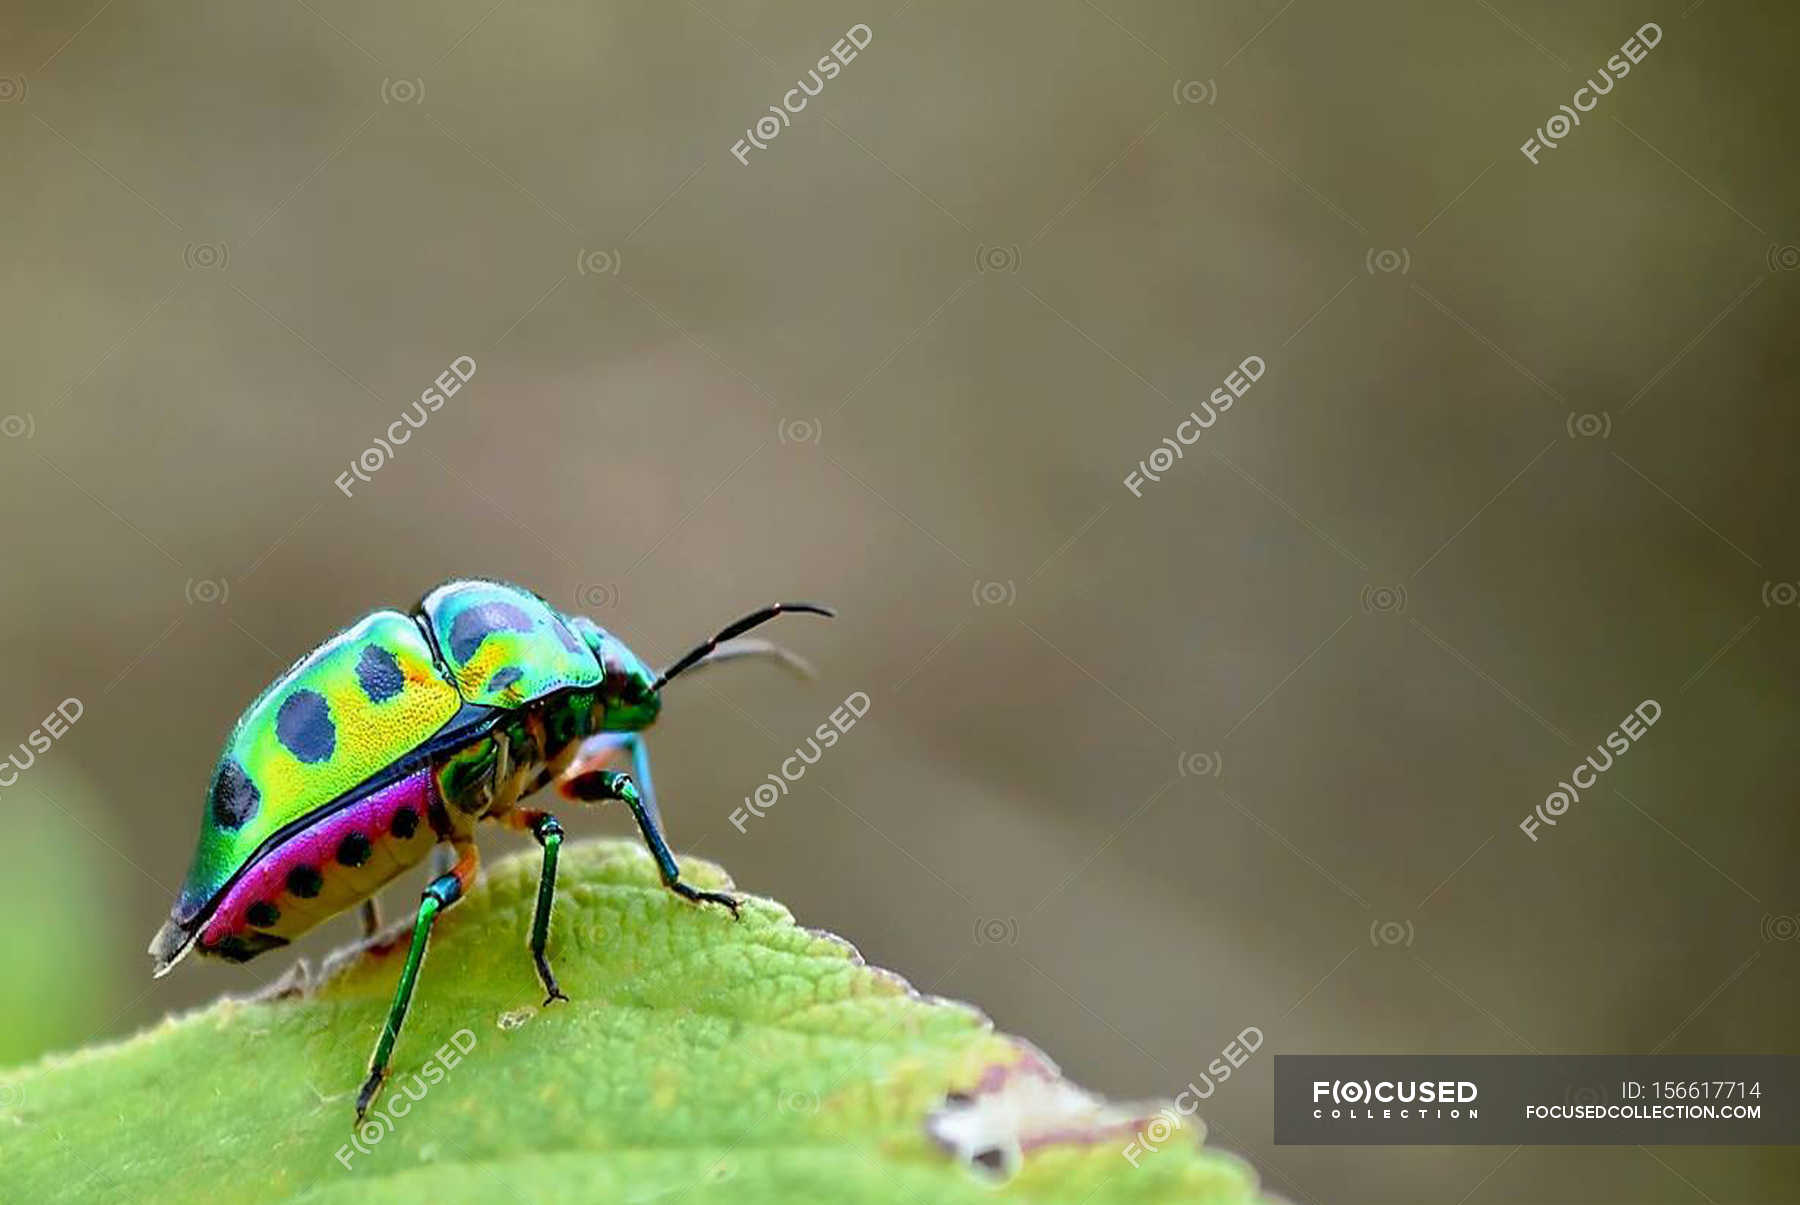 Colorful beetle sitting on gren leaf — Stock Photo | #156617714